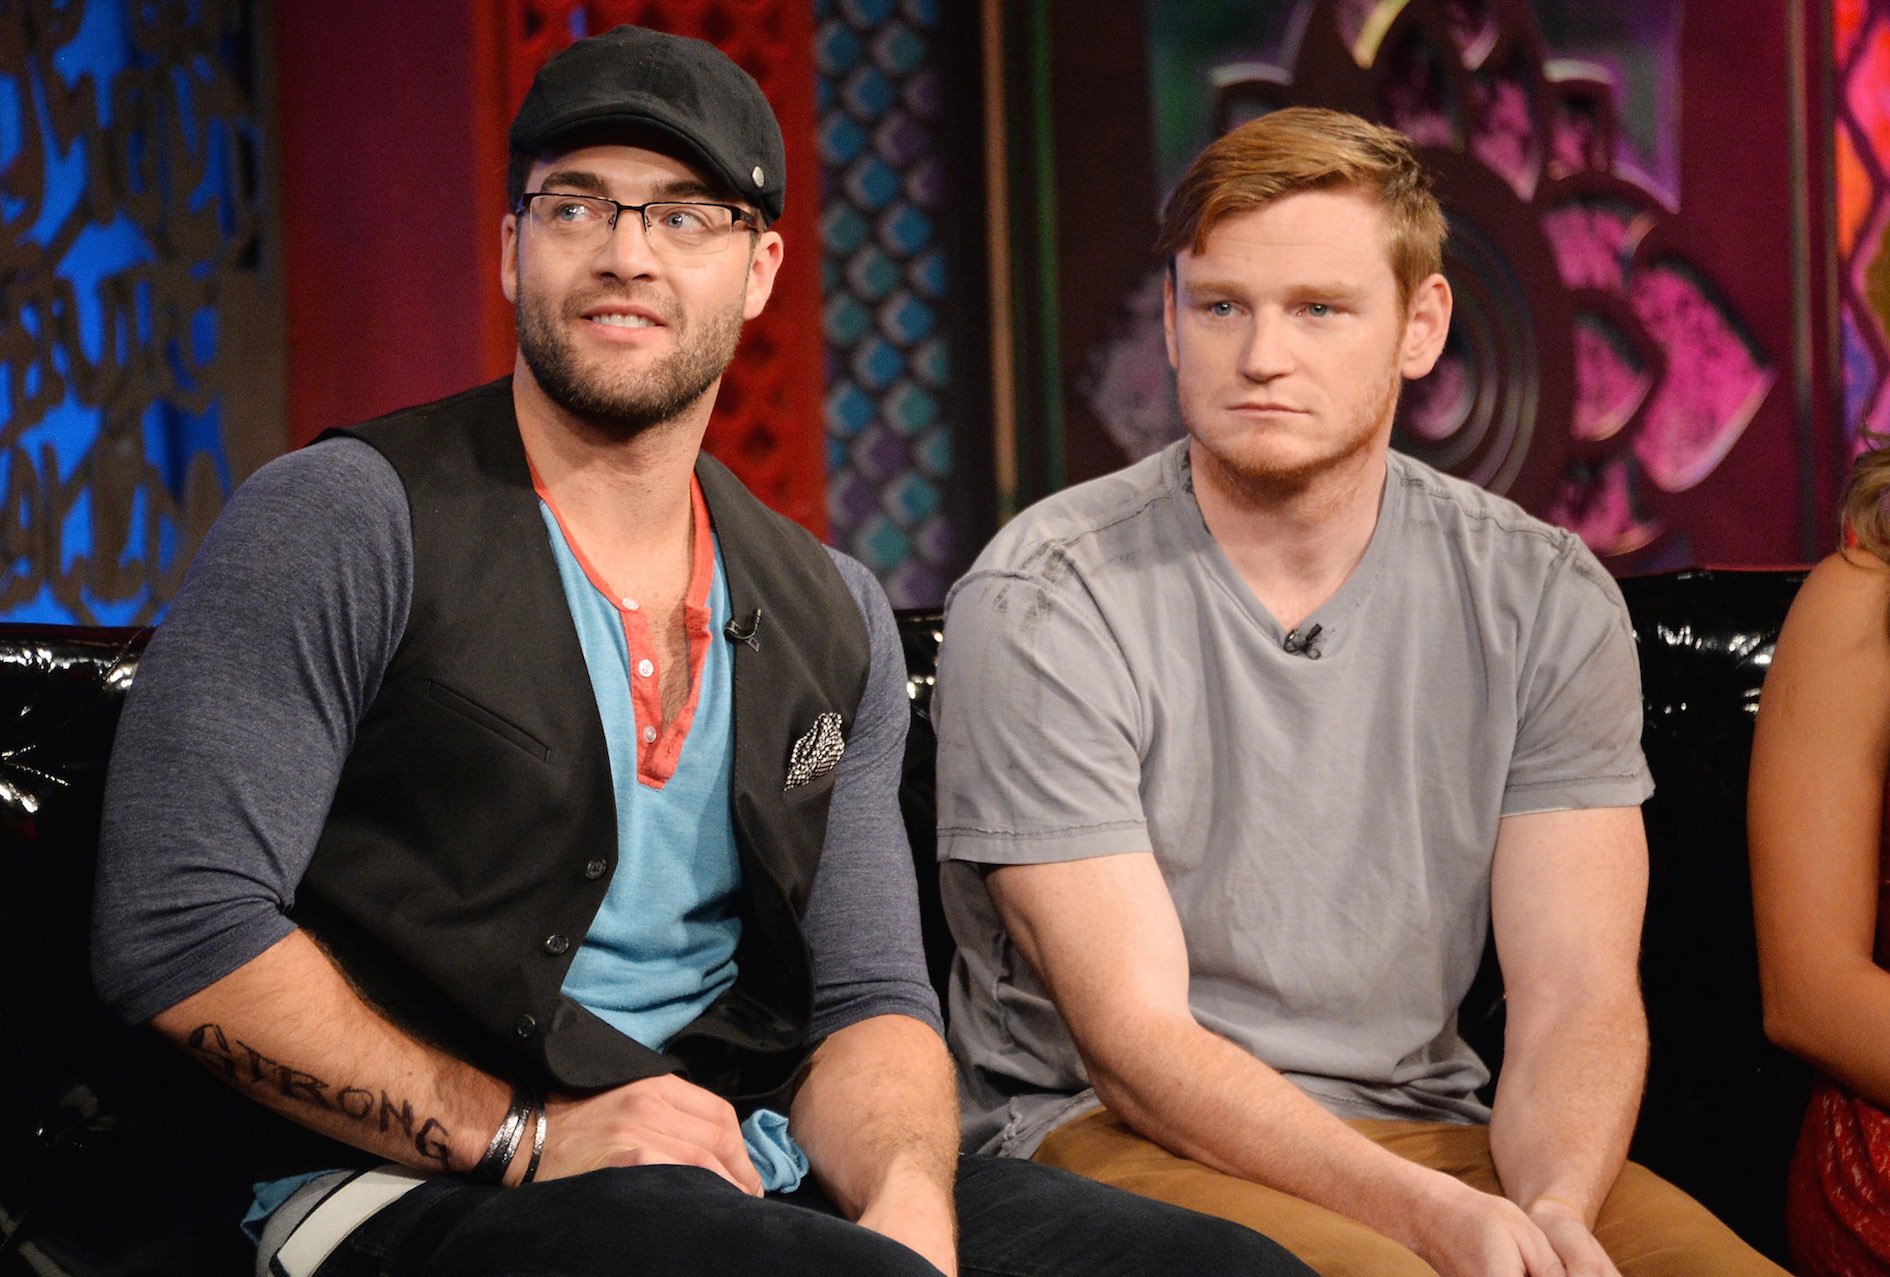 Chris 'C.T' Tamburello and Wes Bergmann attend MTV's 'The Challenge: Rivals II' final episode and reunion party 